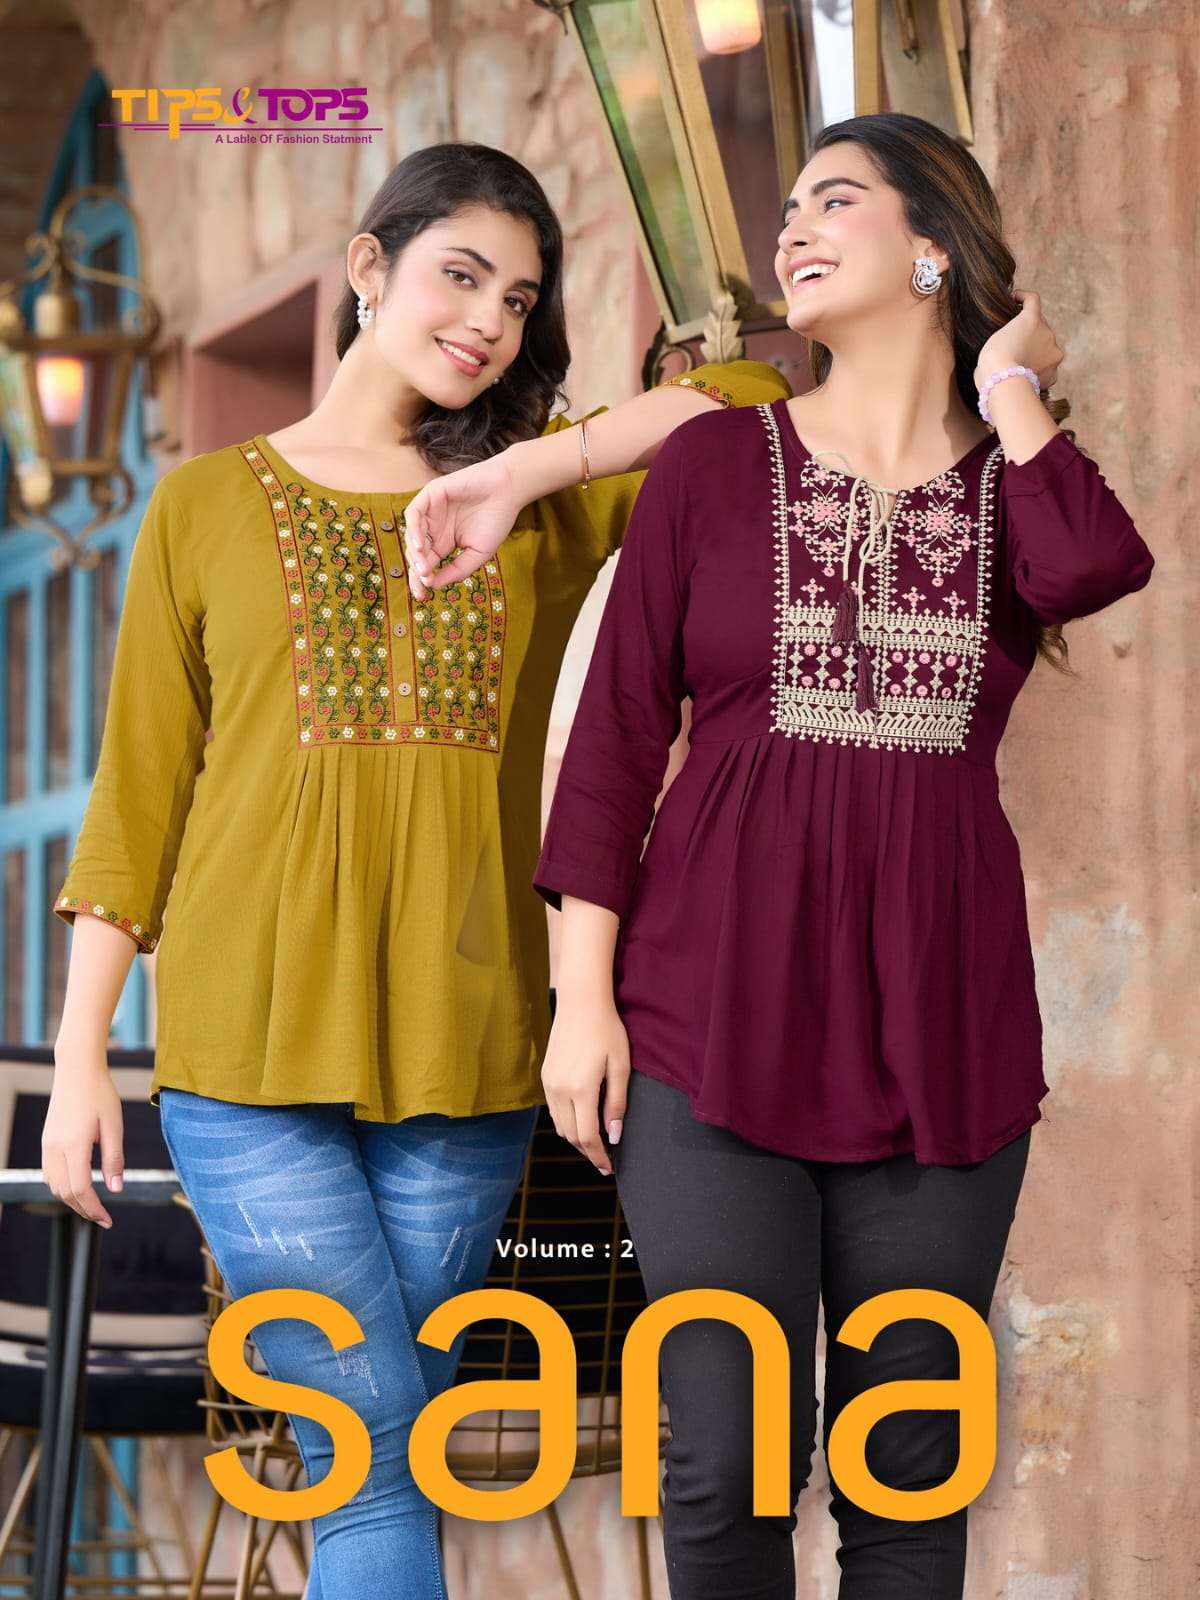 Tip & tops sana vol 2 Rayon with Printed Short tops collecti...